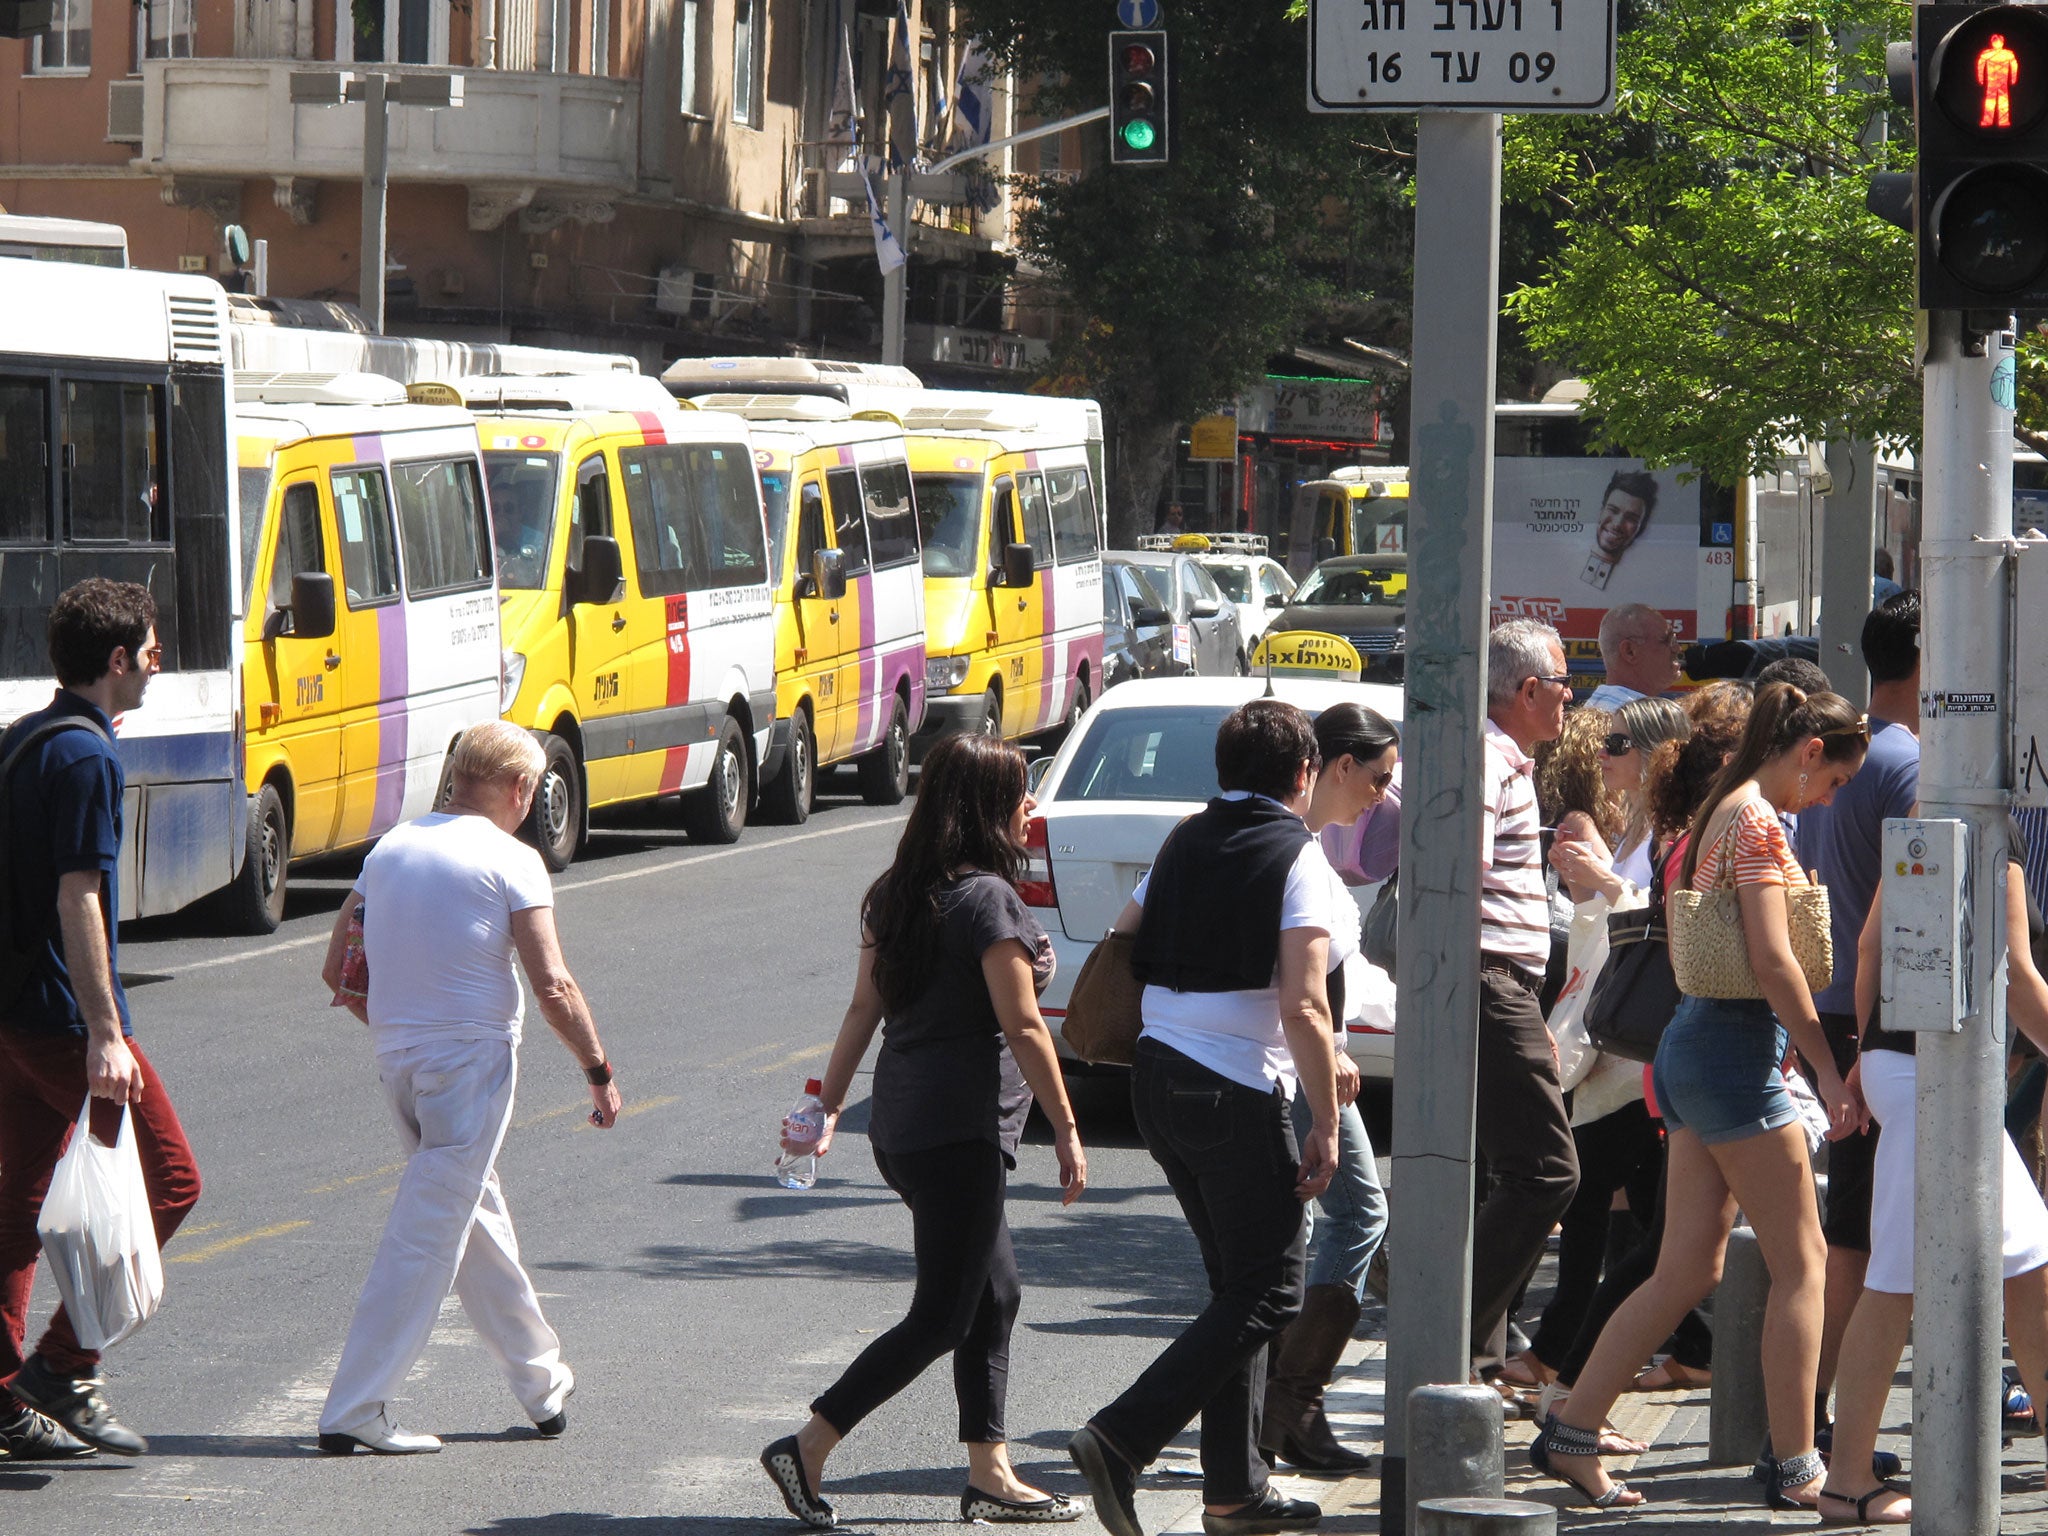 Tourists warned to avoid travelling on buses in Tel Aviv